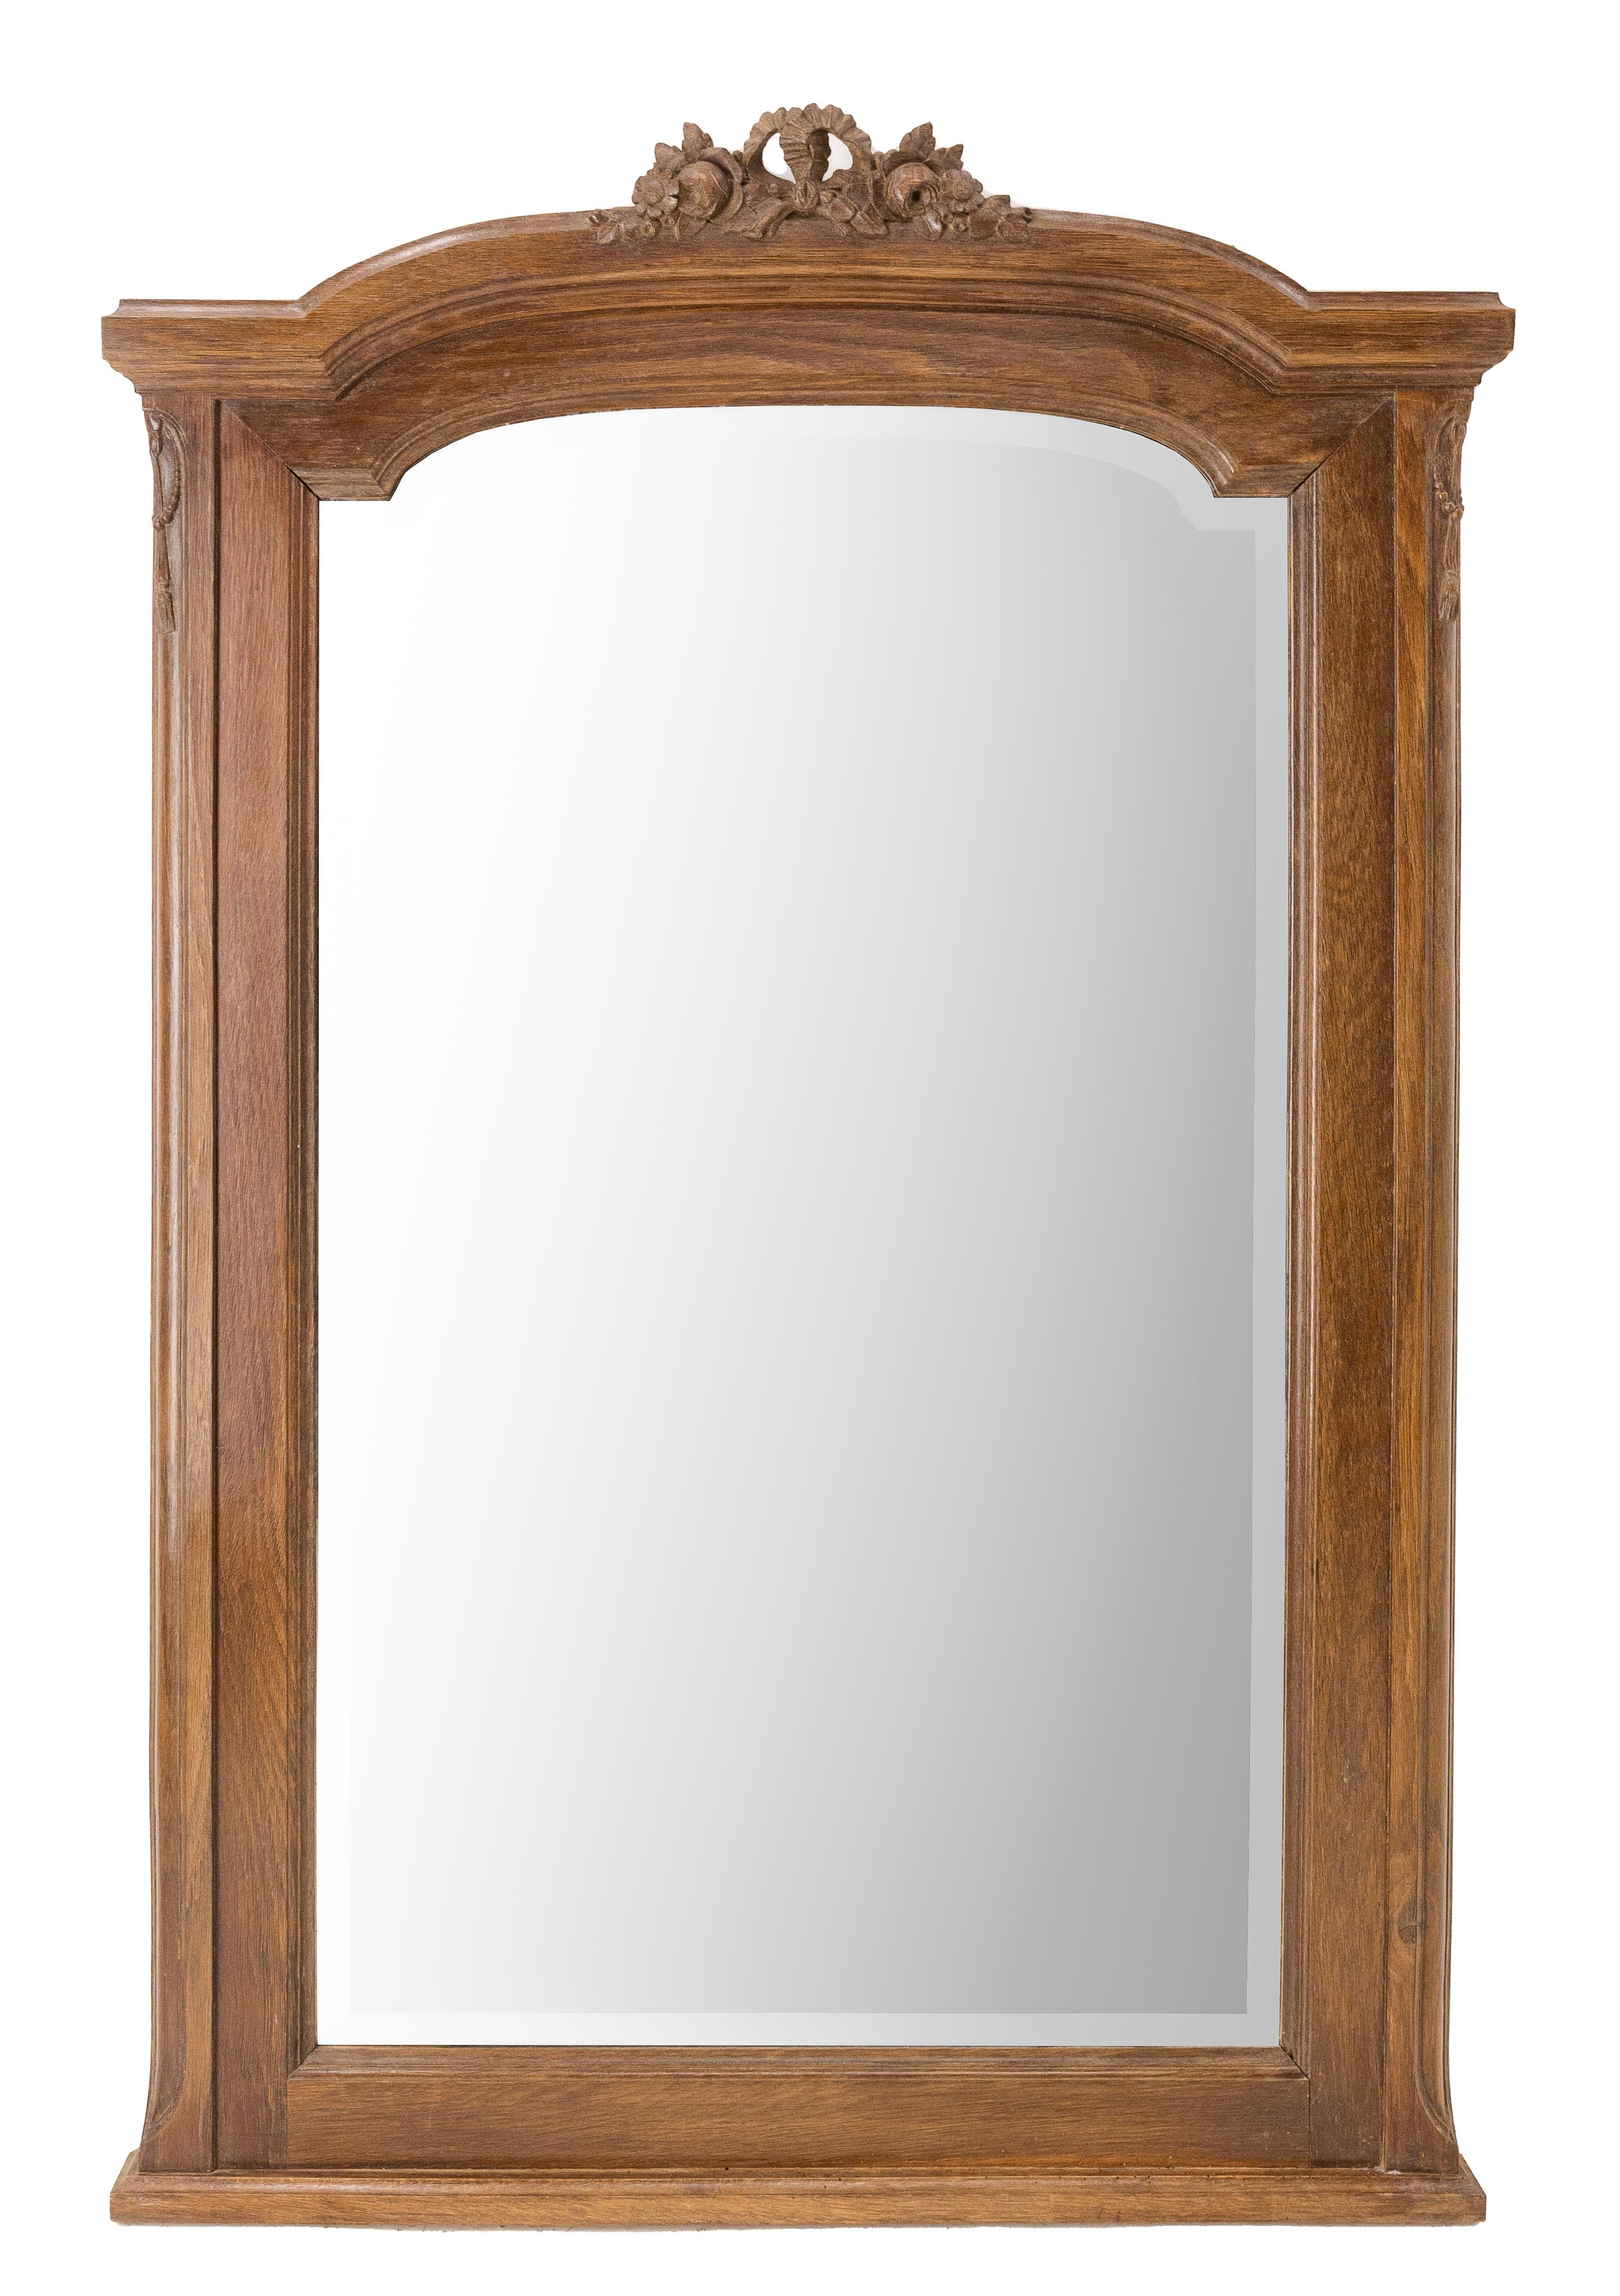 Early 20th century Louis XVI style mirror, oak frame, French.
Can be suspended from the wall or placed on a fireplace mantel or on a piece of furniture.
Carved flower and pearls on the frame.
Original mirror, with marks of use which gives its charm